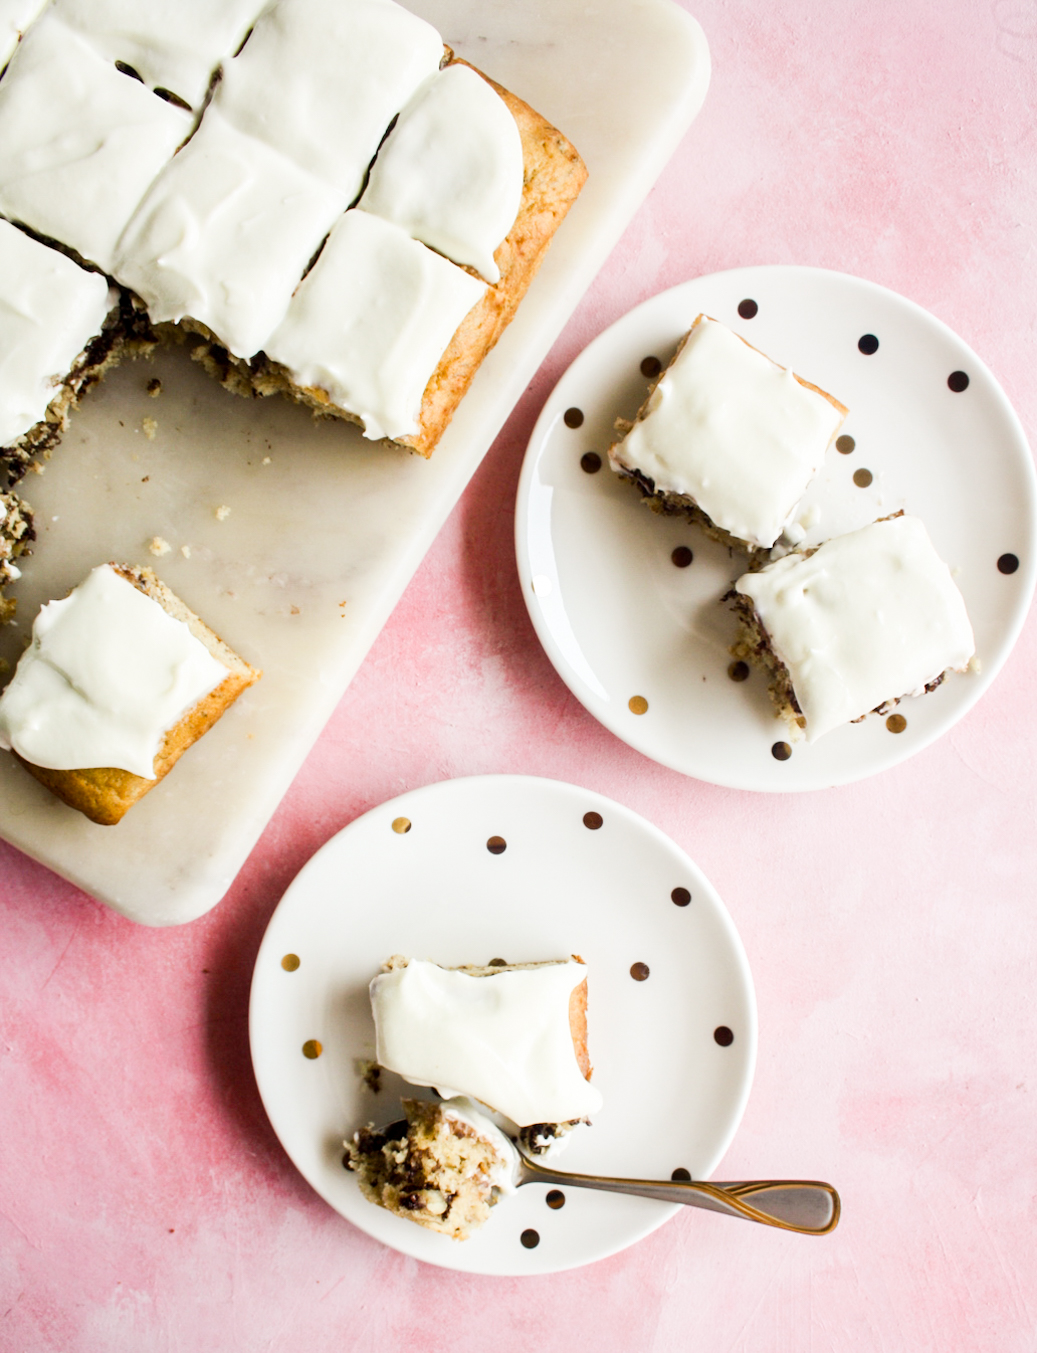 Soft banana cake with walnuts, chocolate chips and cream cheese frosting